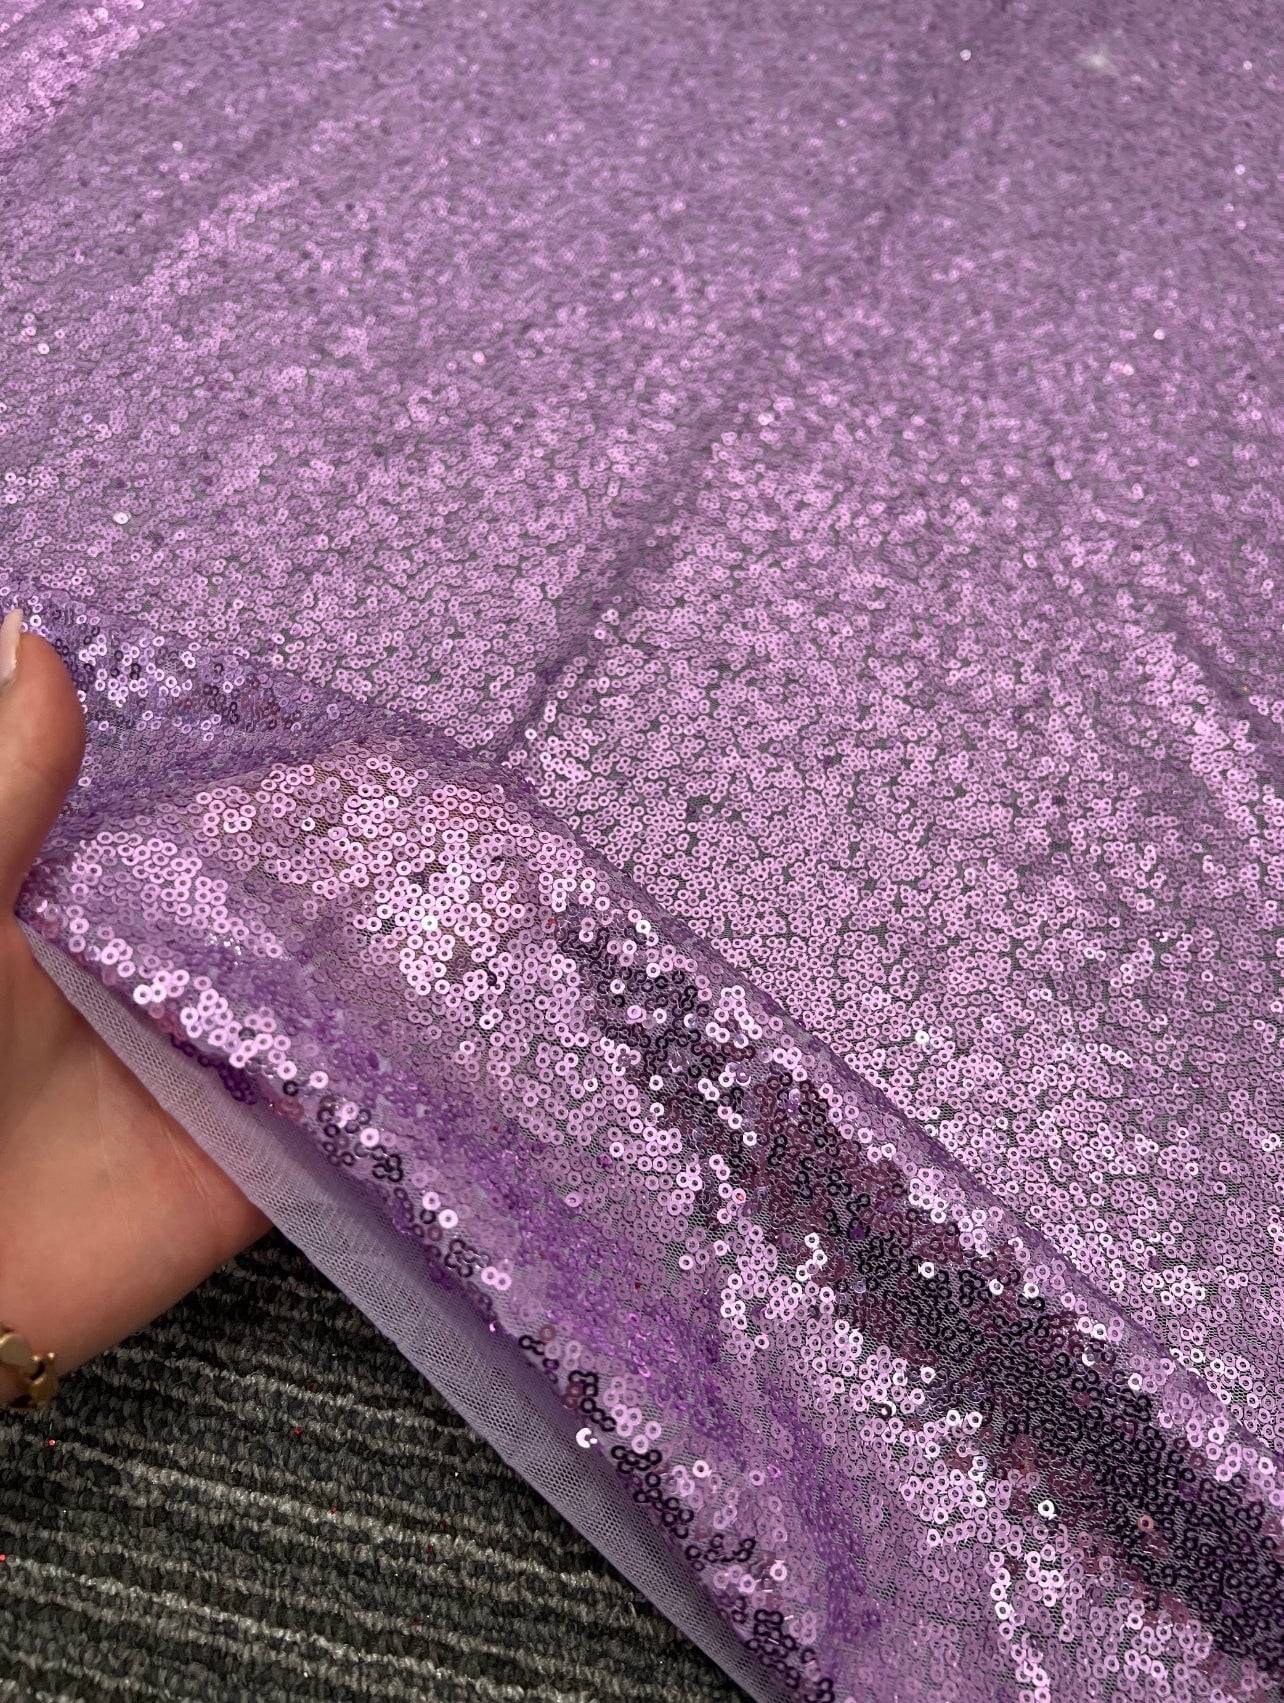 Lavender Sequin on Mesh, purple Sequin on Mesh, purple Sequin, eco-friendly fabric, pure Sequin on Mesh fabric, stretch sequin mesh, sequin fabric, kiki textiles, sewing